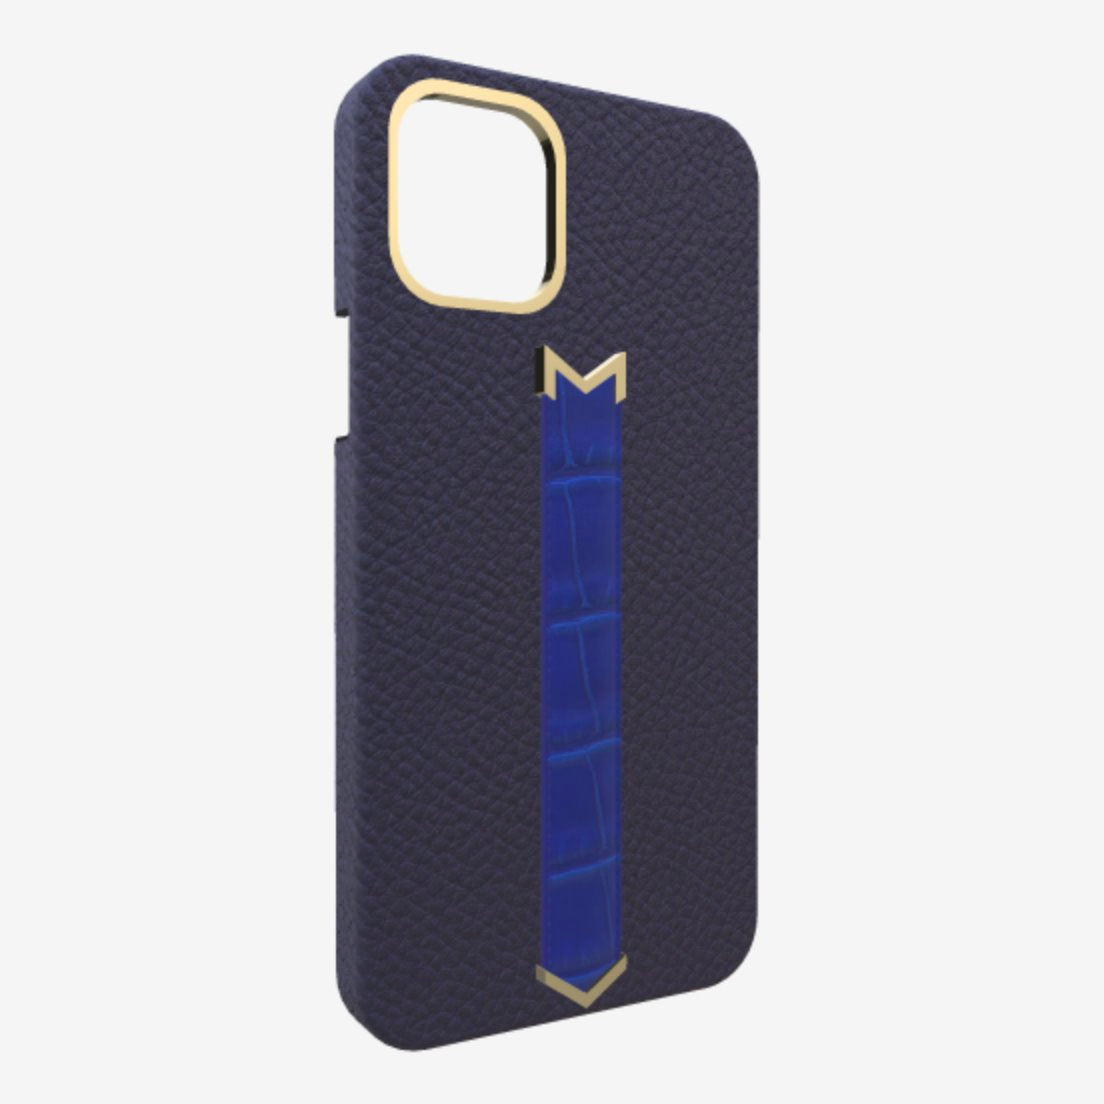 Gold Finger Strap Case for iPhone 13 Pro Max in Genuine Calfskin and Alligator Navy Blue Electric Blue 